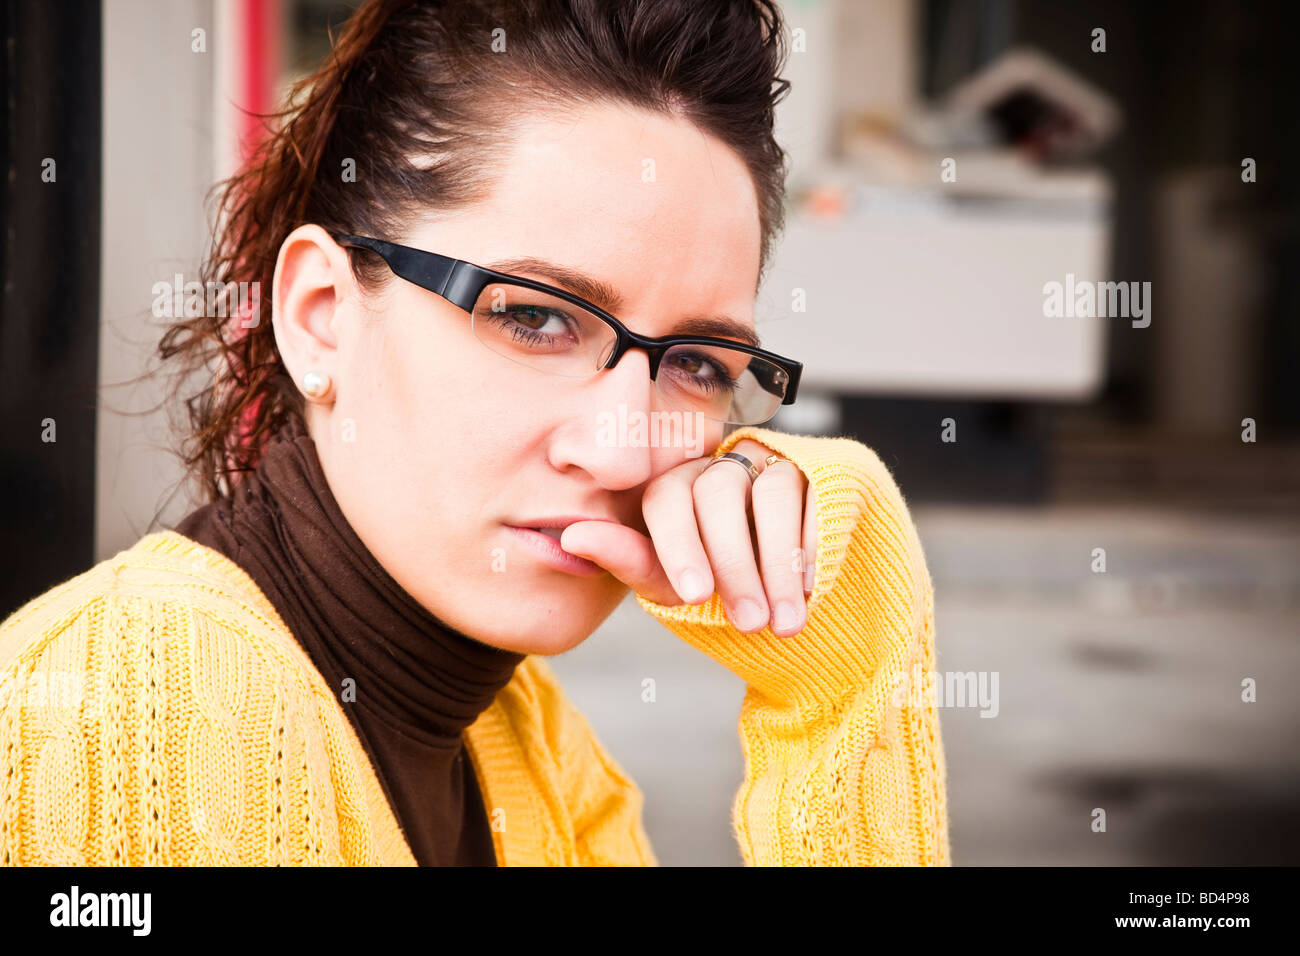 Young serious woman portrait staring at camera Stock Photo